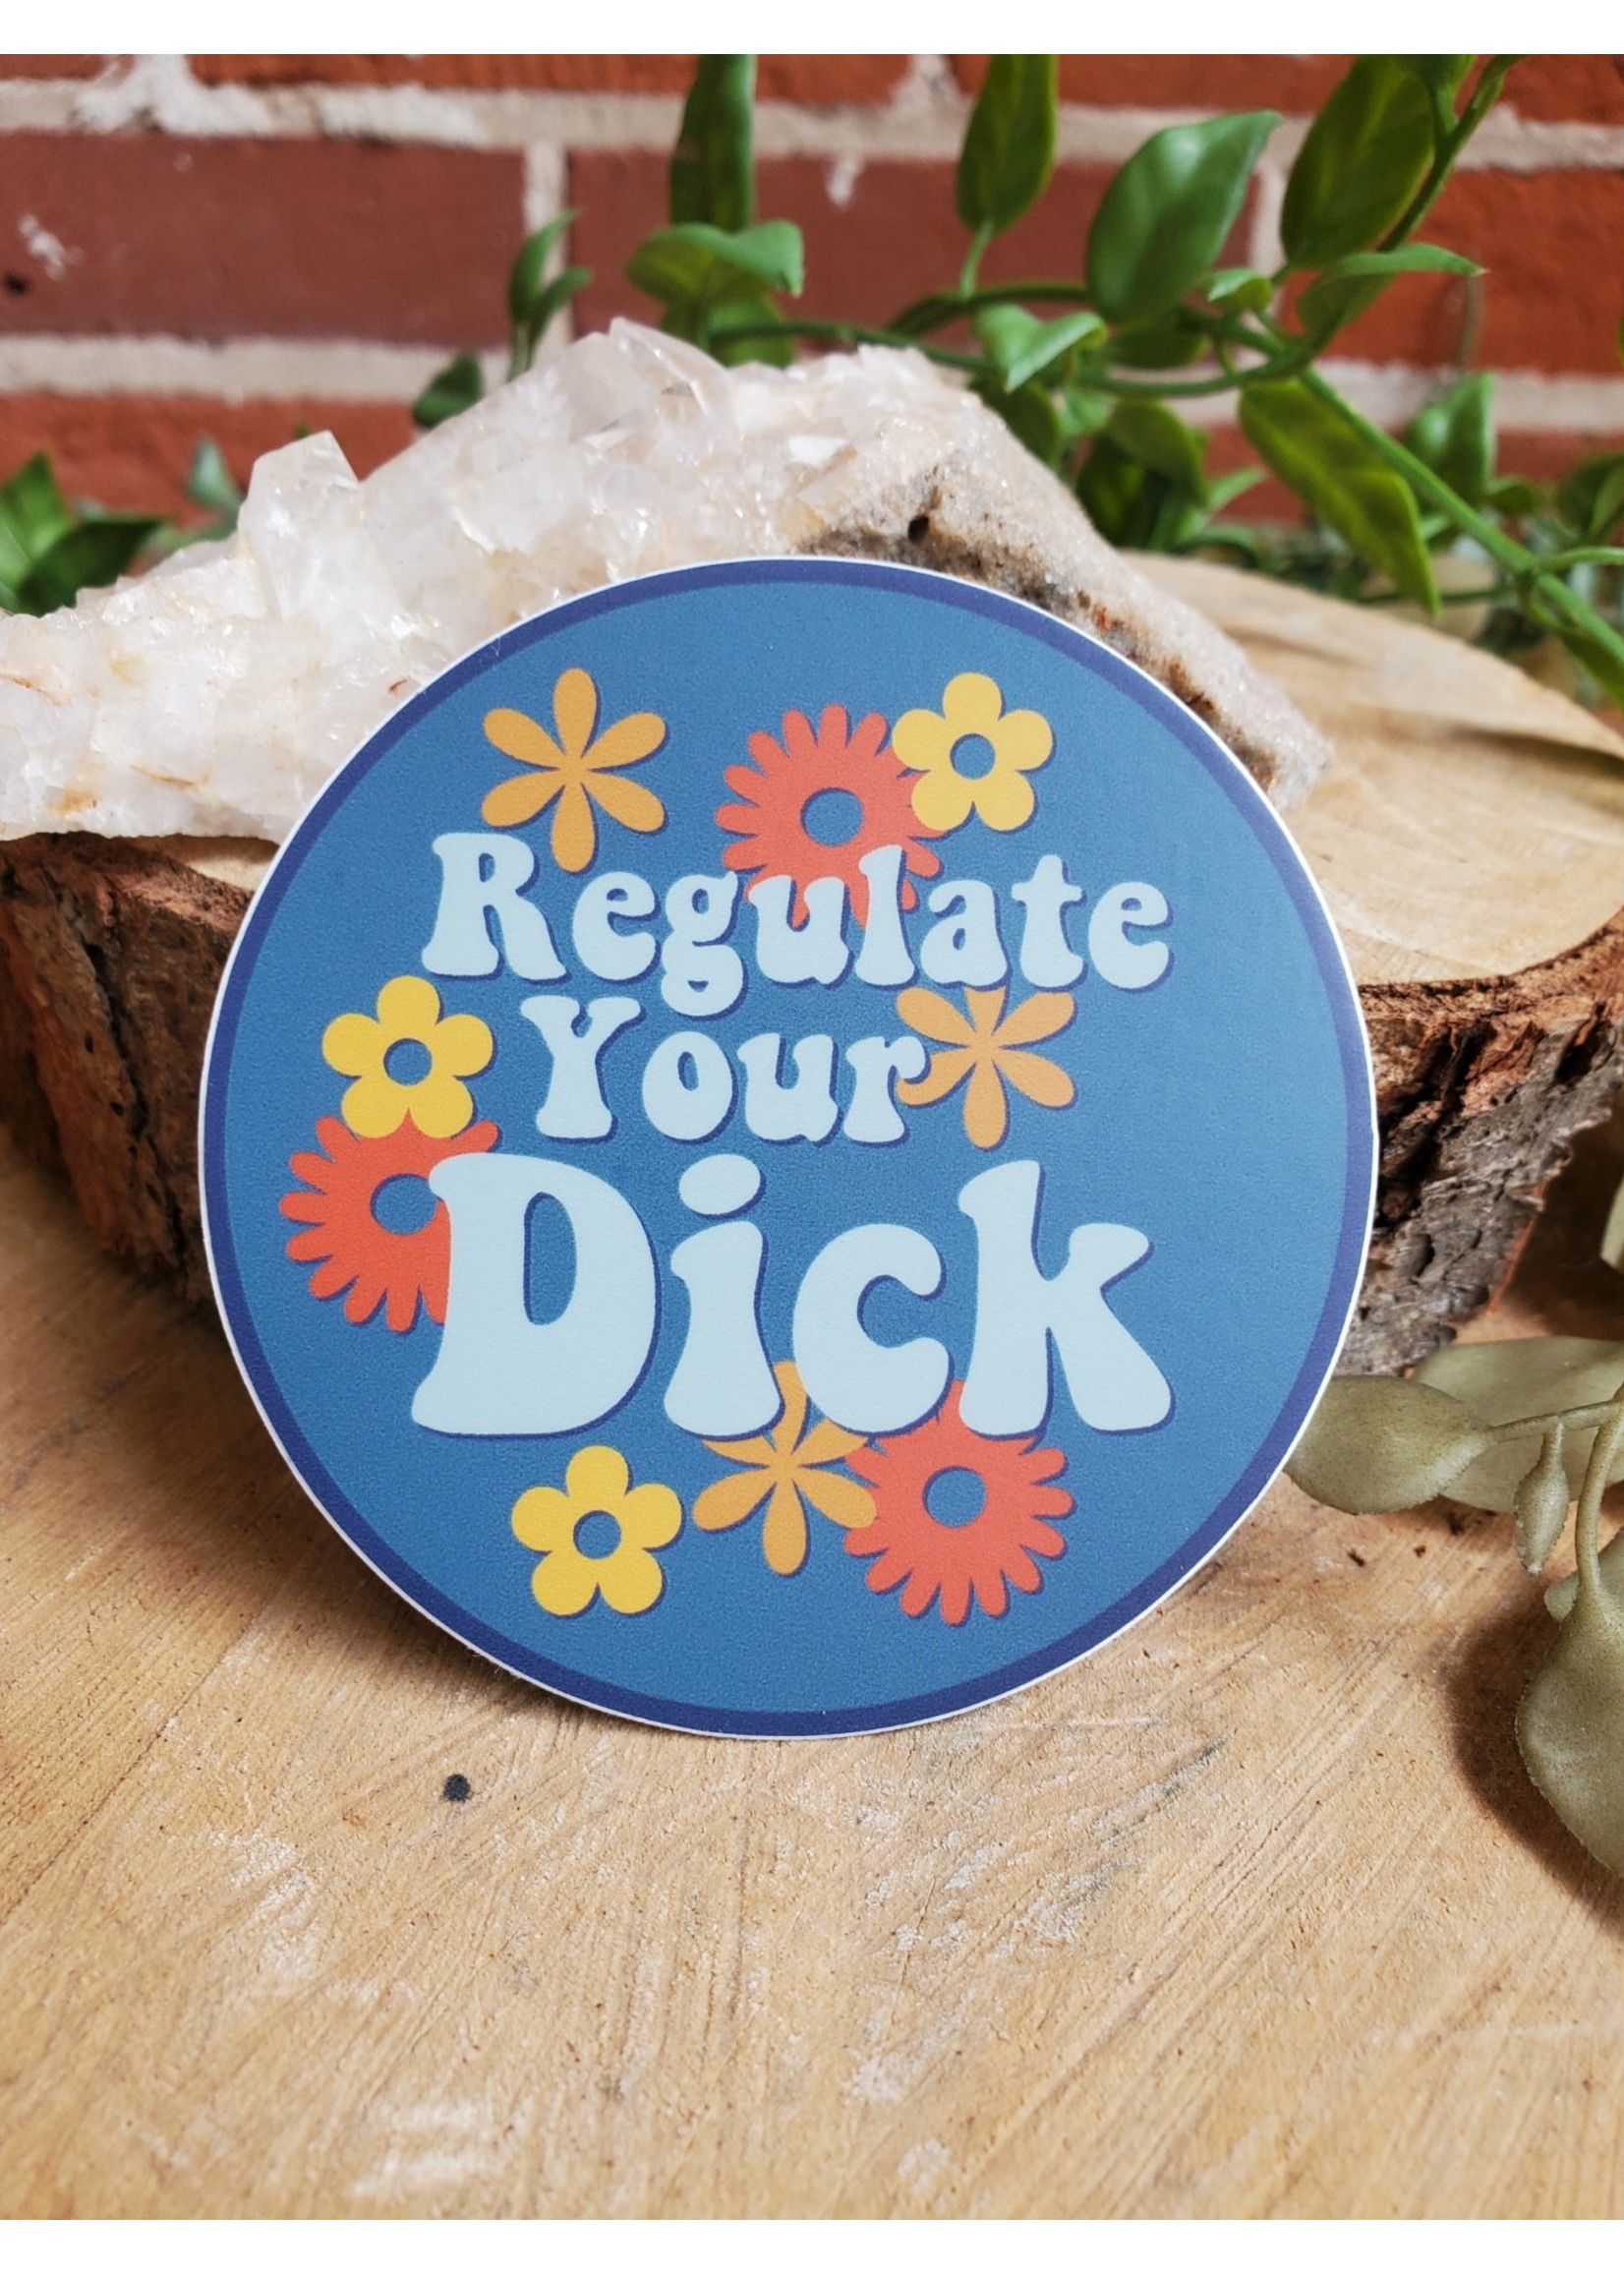 Tangled Up In Hue Sticker - Regulate Your Dick